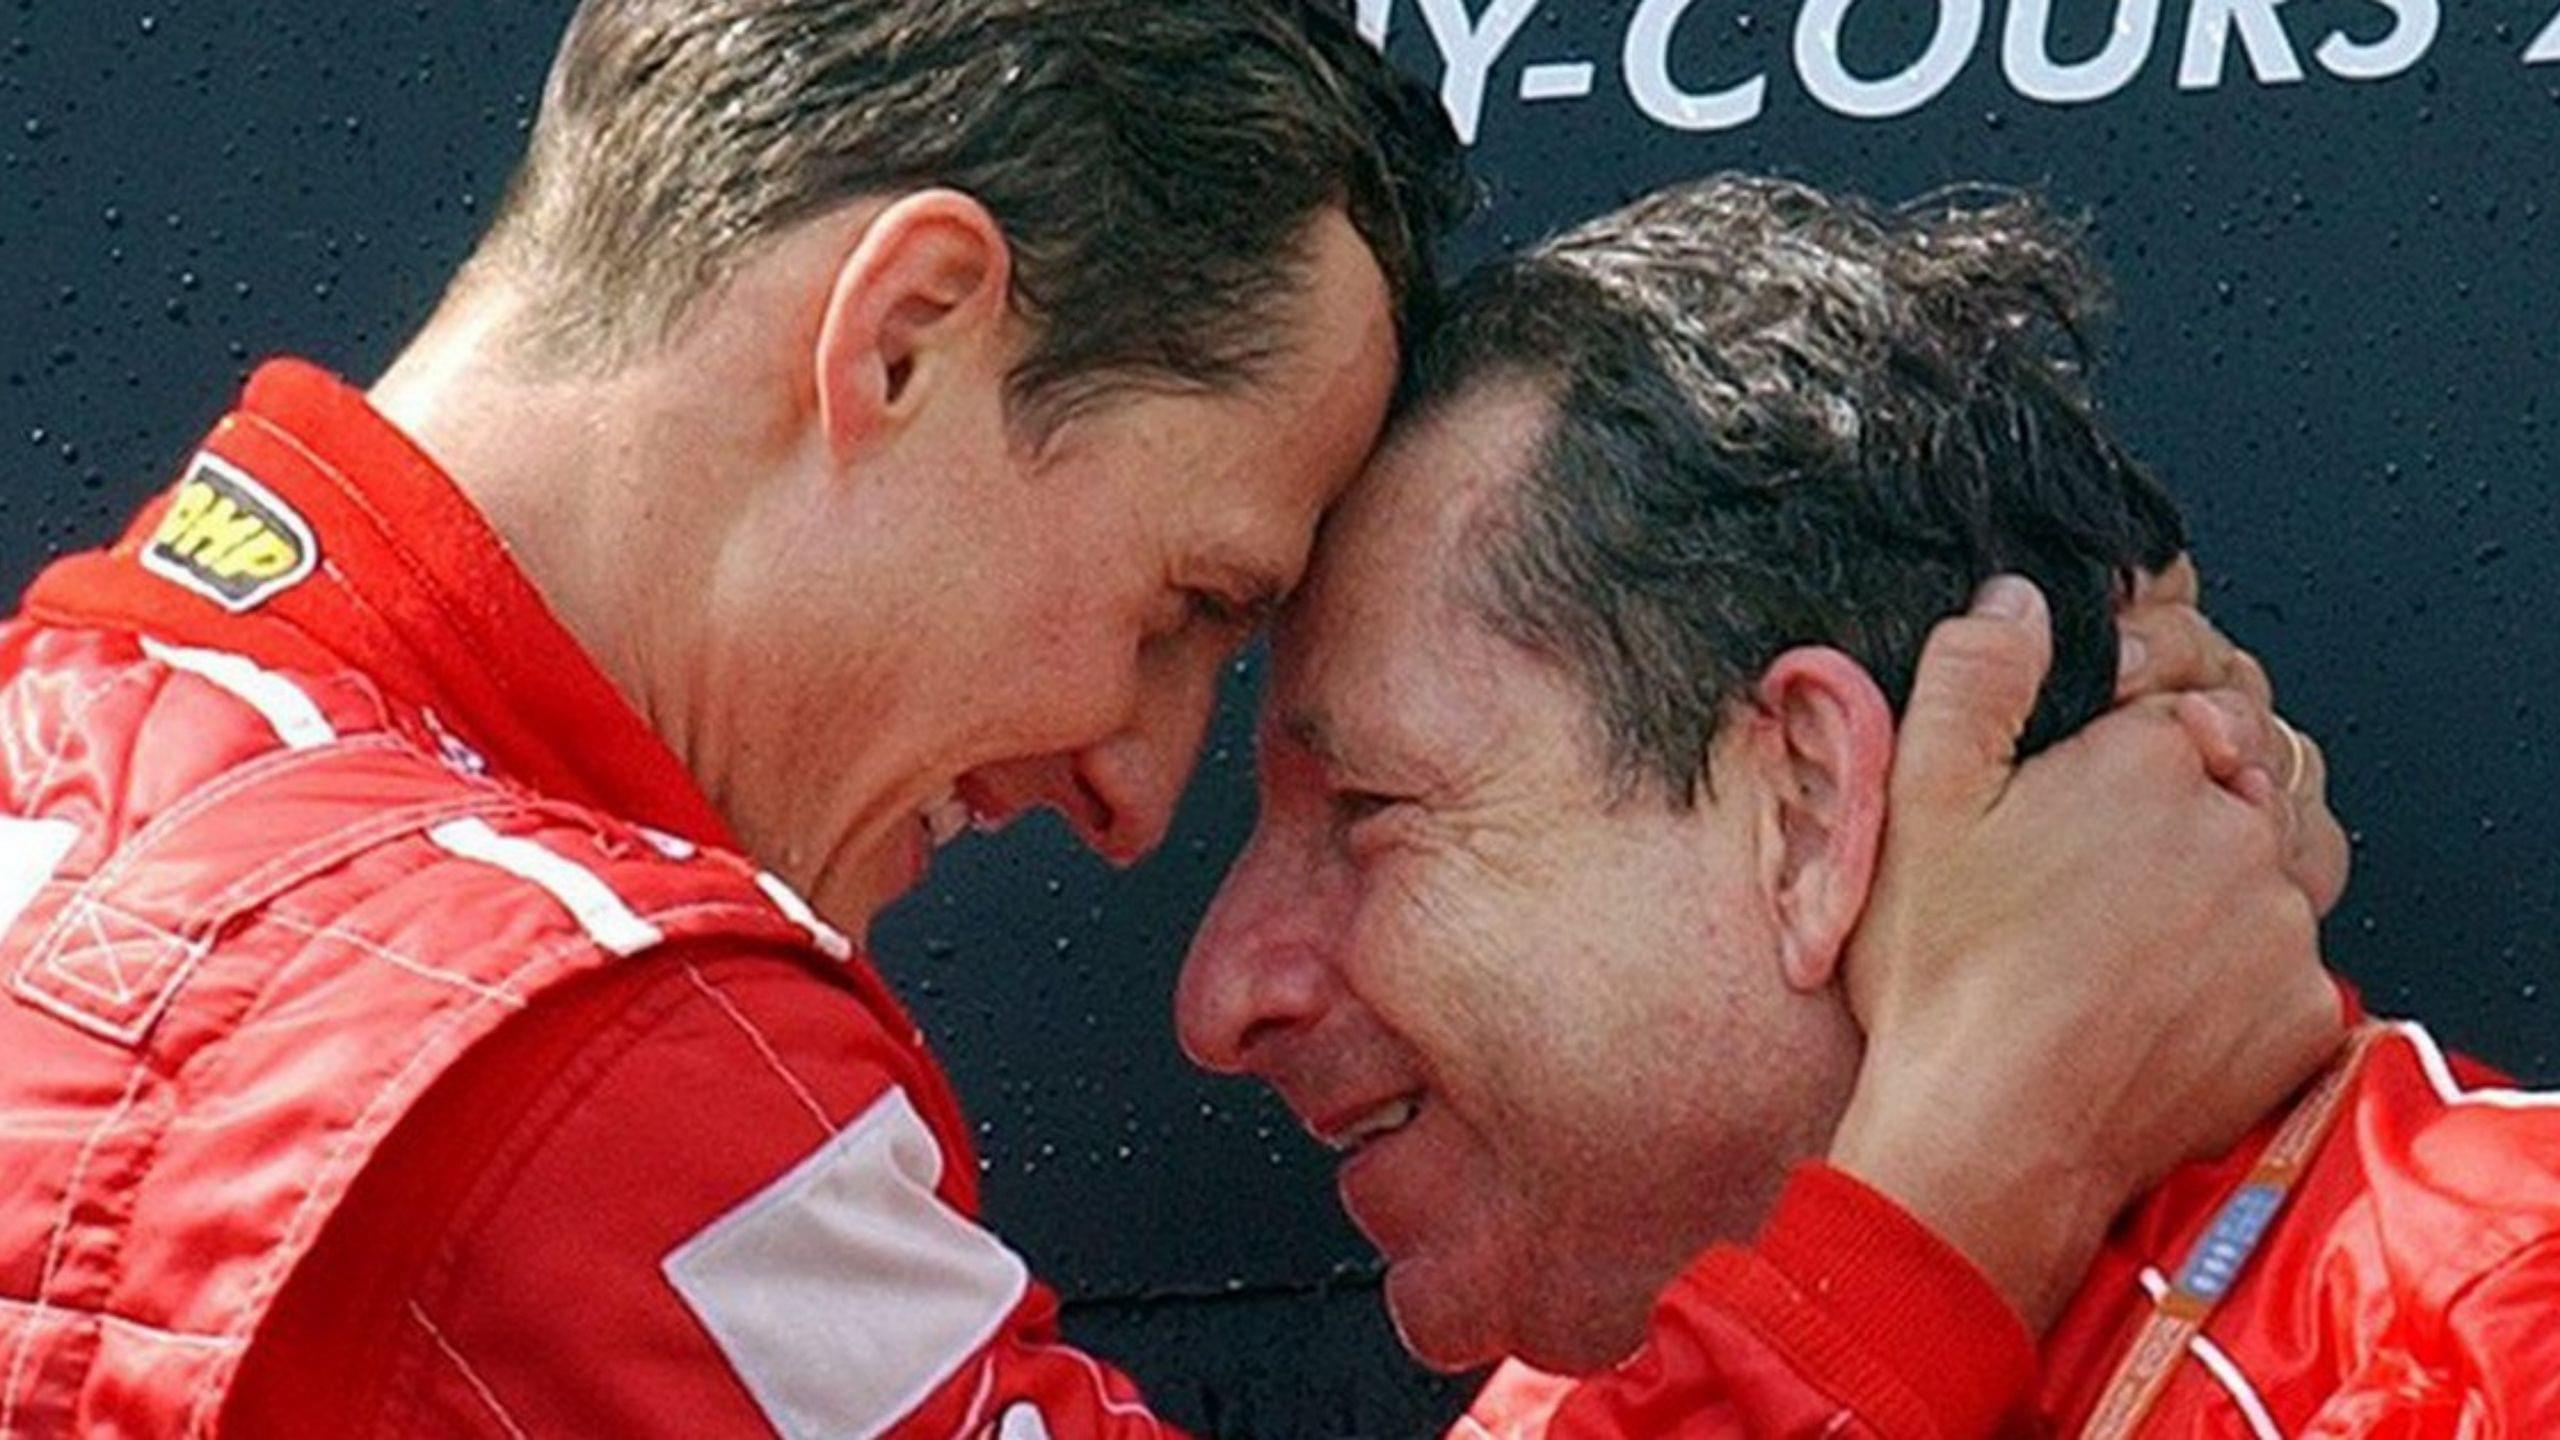 "Of course he is following him" - FIA boss Jean Todt reveals Michael Schumacher is tracking son Mick's potential rise to F1